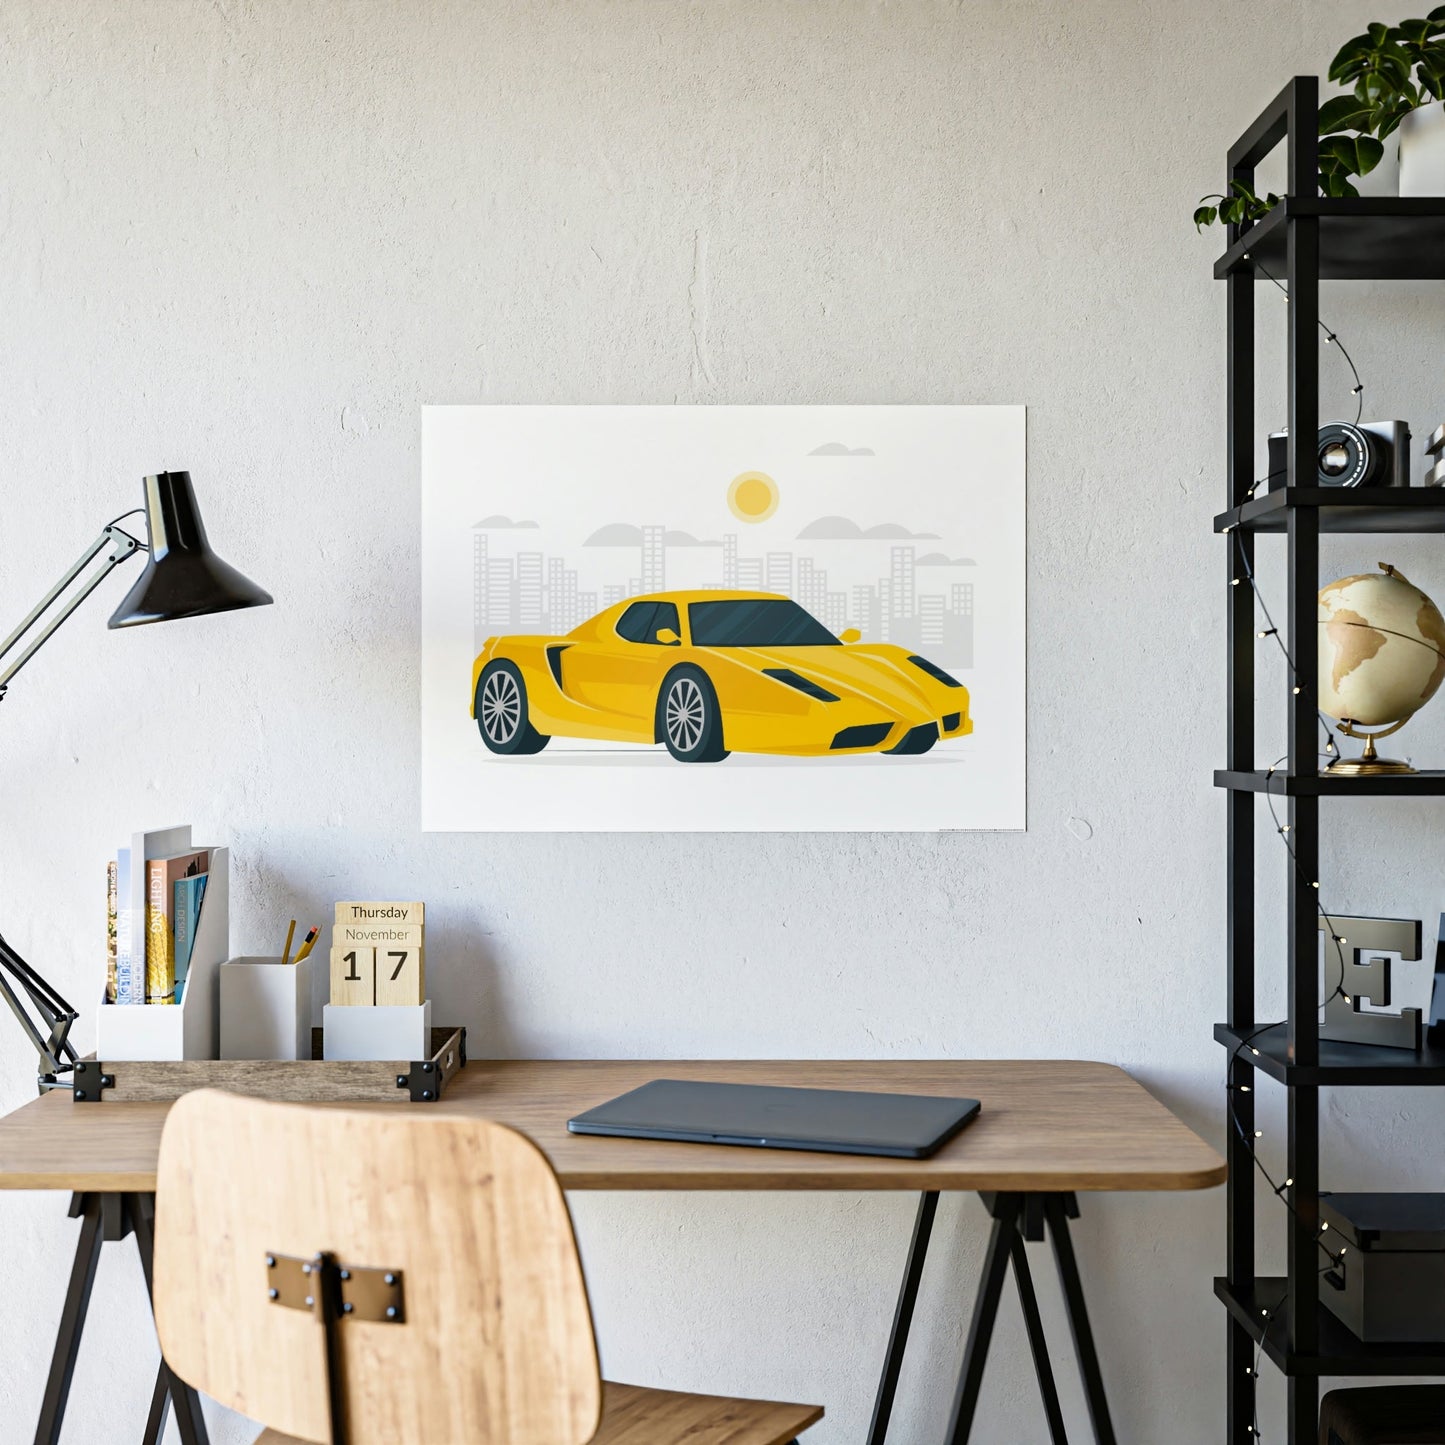 Graceful Power: Lamborghini Framed Poster & Canvas and Wall Art Decor